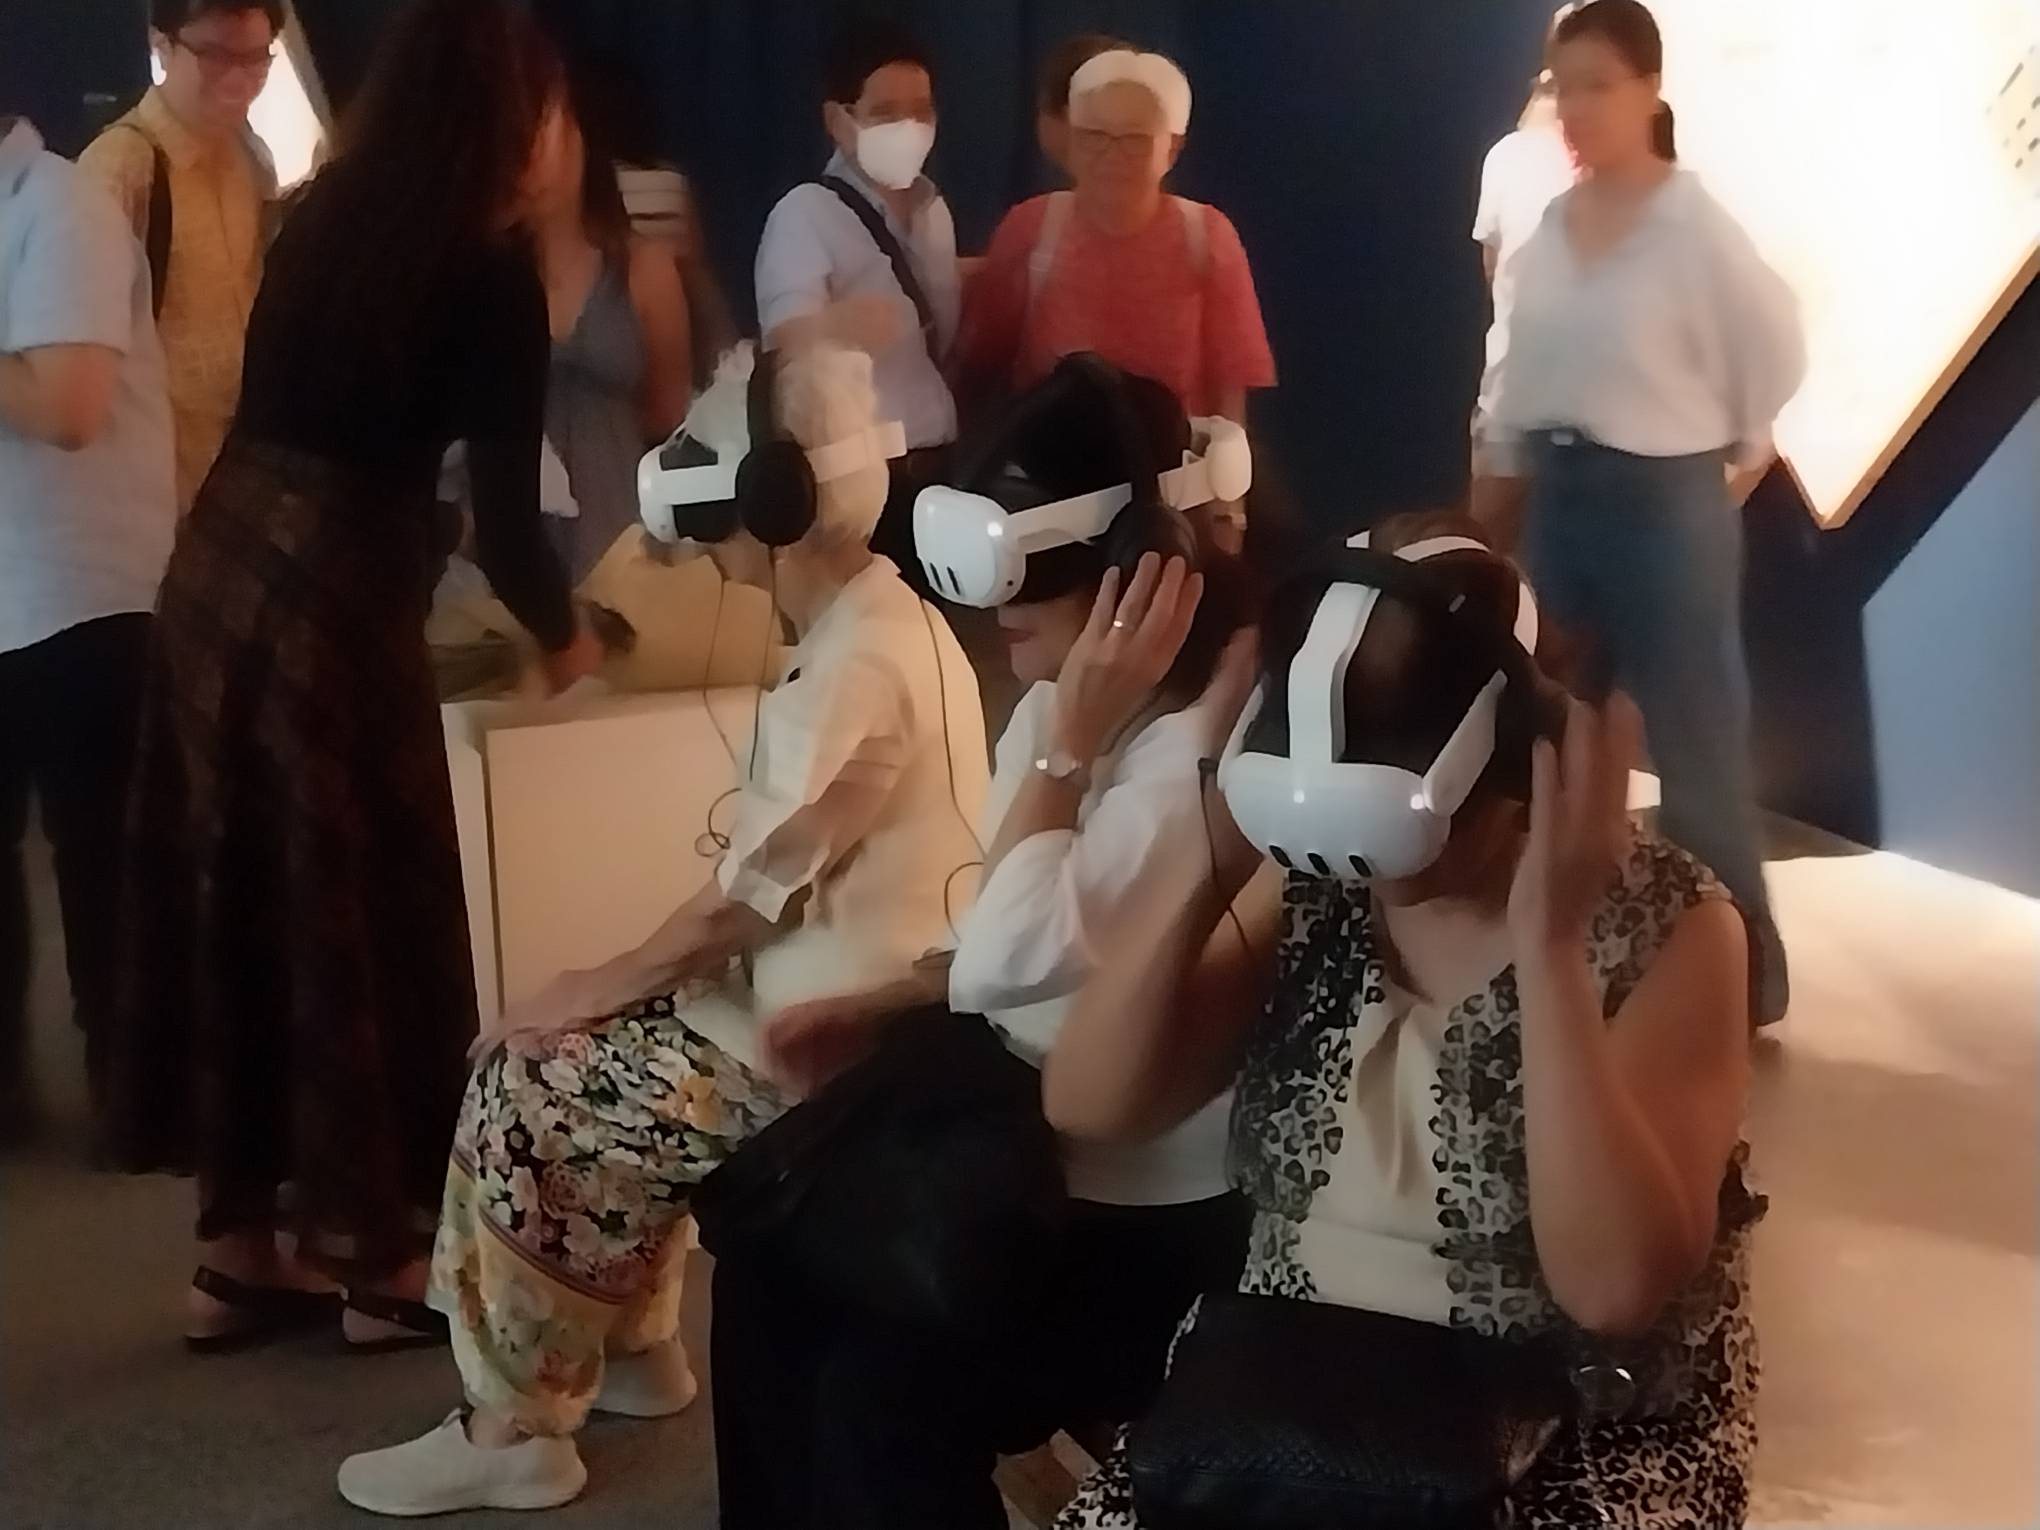 Three spectators using the VR component of the exhibit. Photo by Elle Yap.